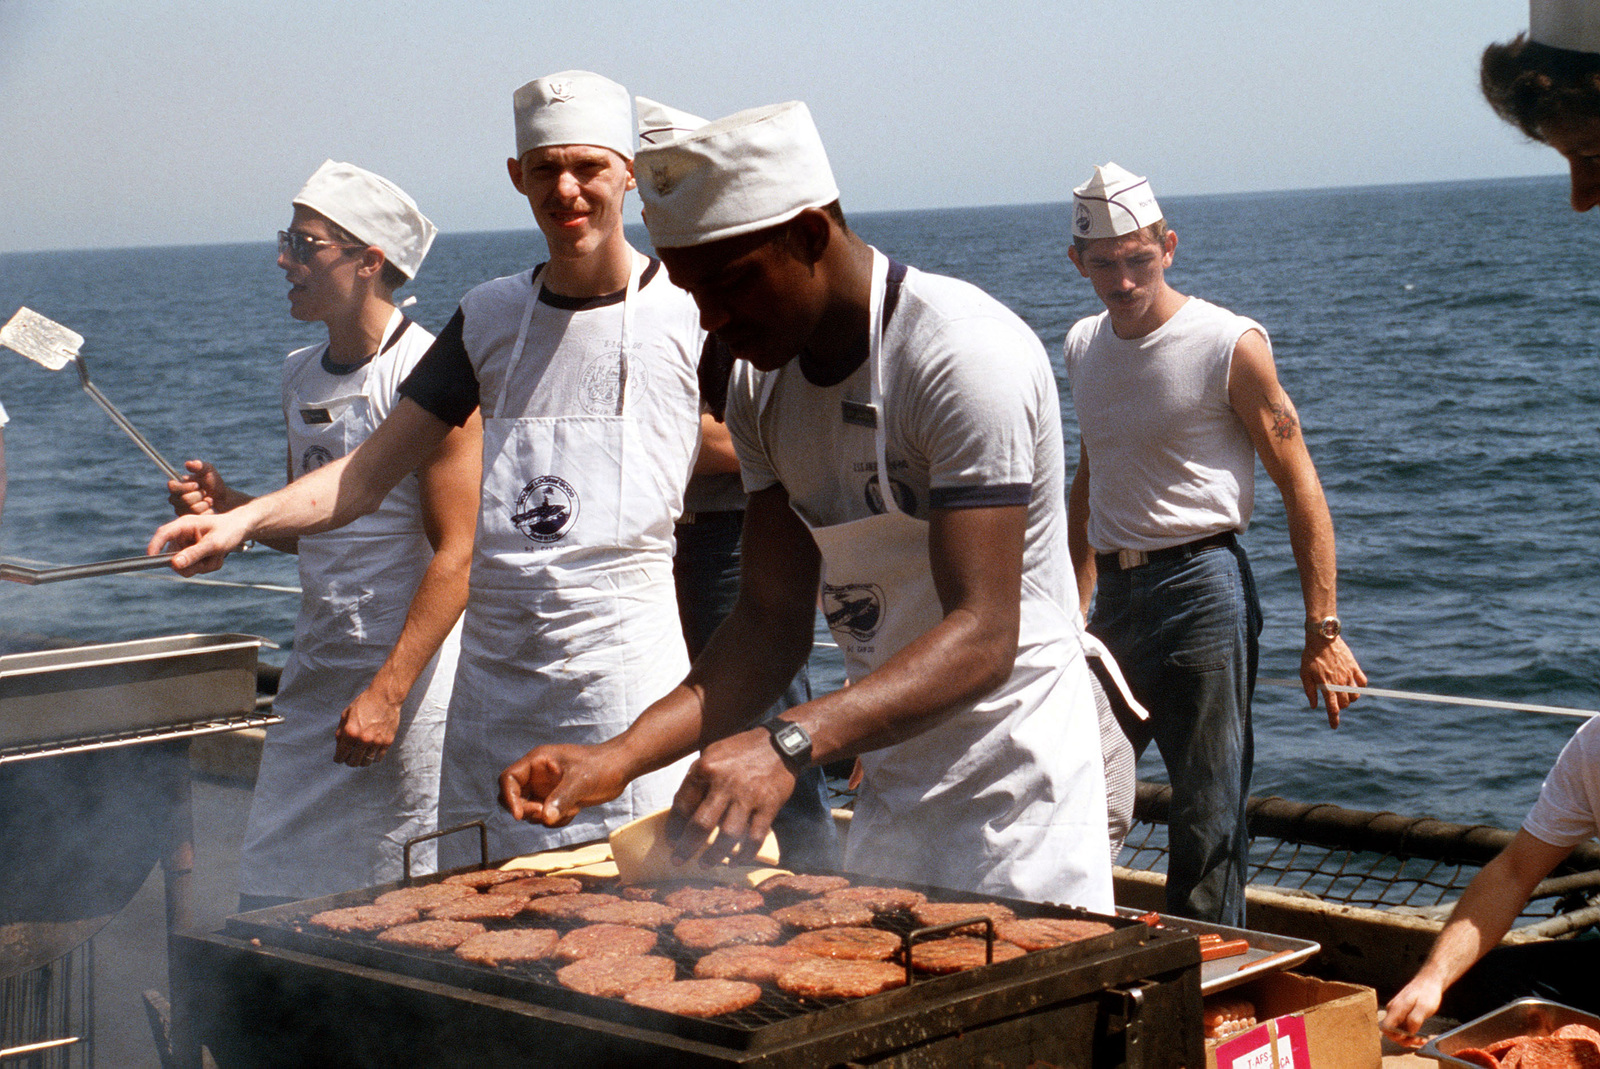 mess-management-specialist-prepare-food-for-a-picnic-aboard-the-aircraft-carrier-1a93b2-1600.jpg